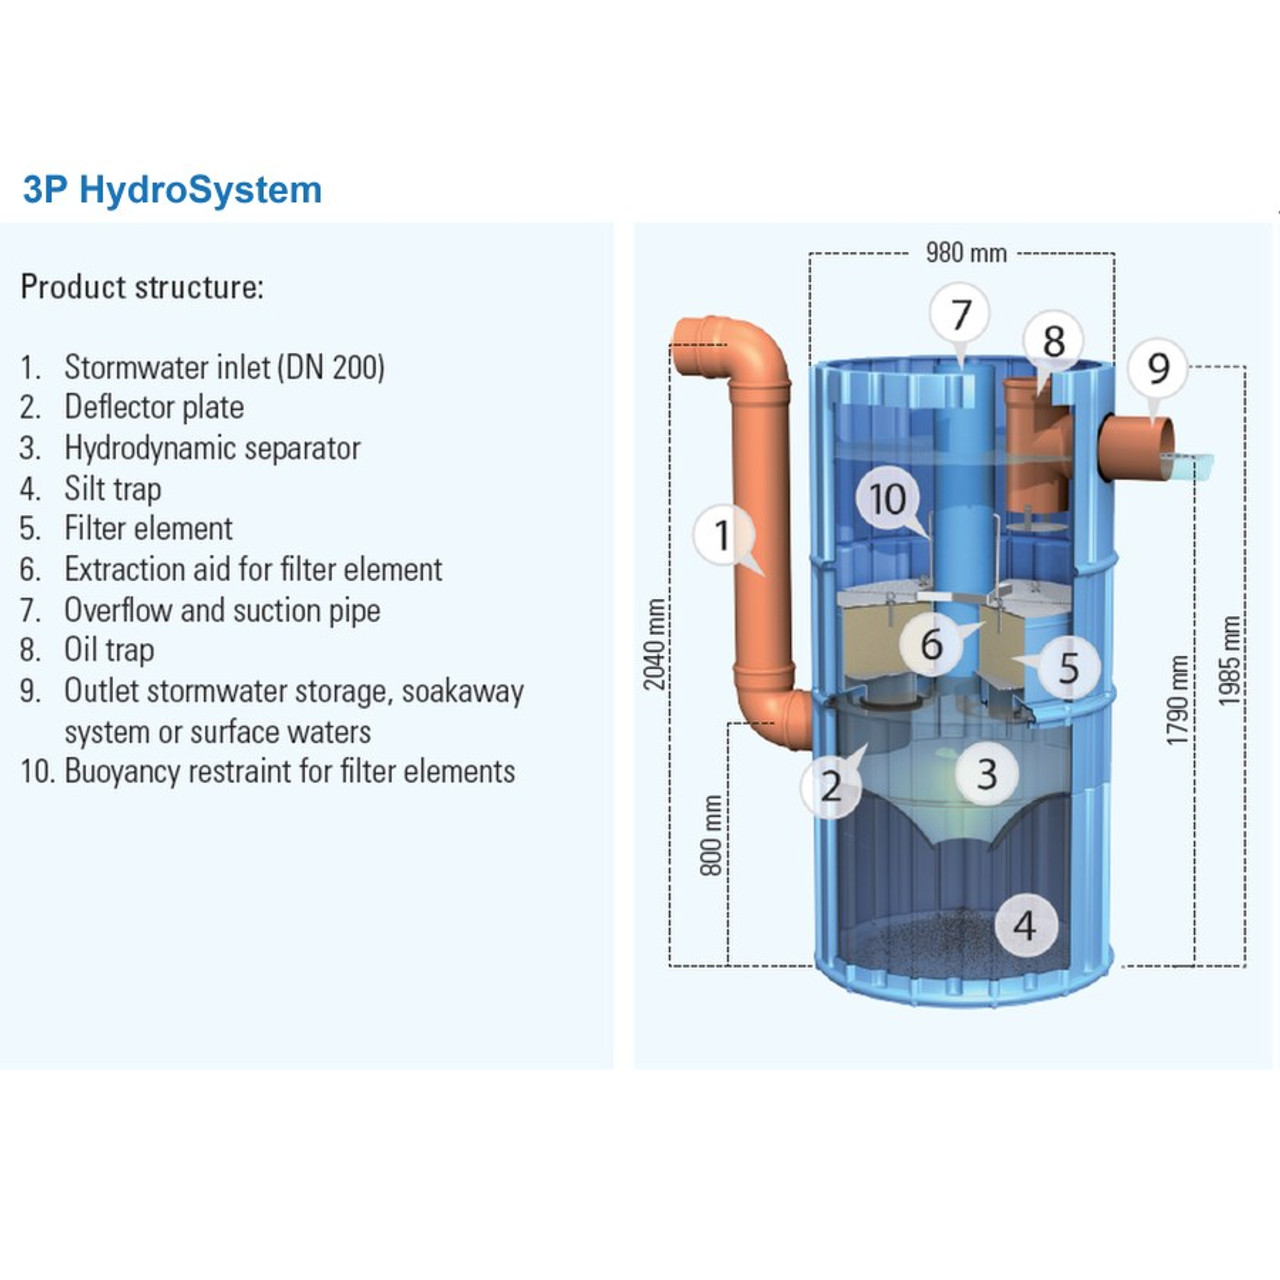 HydroSystem 1000 overview of internal components and dimensions.